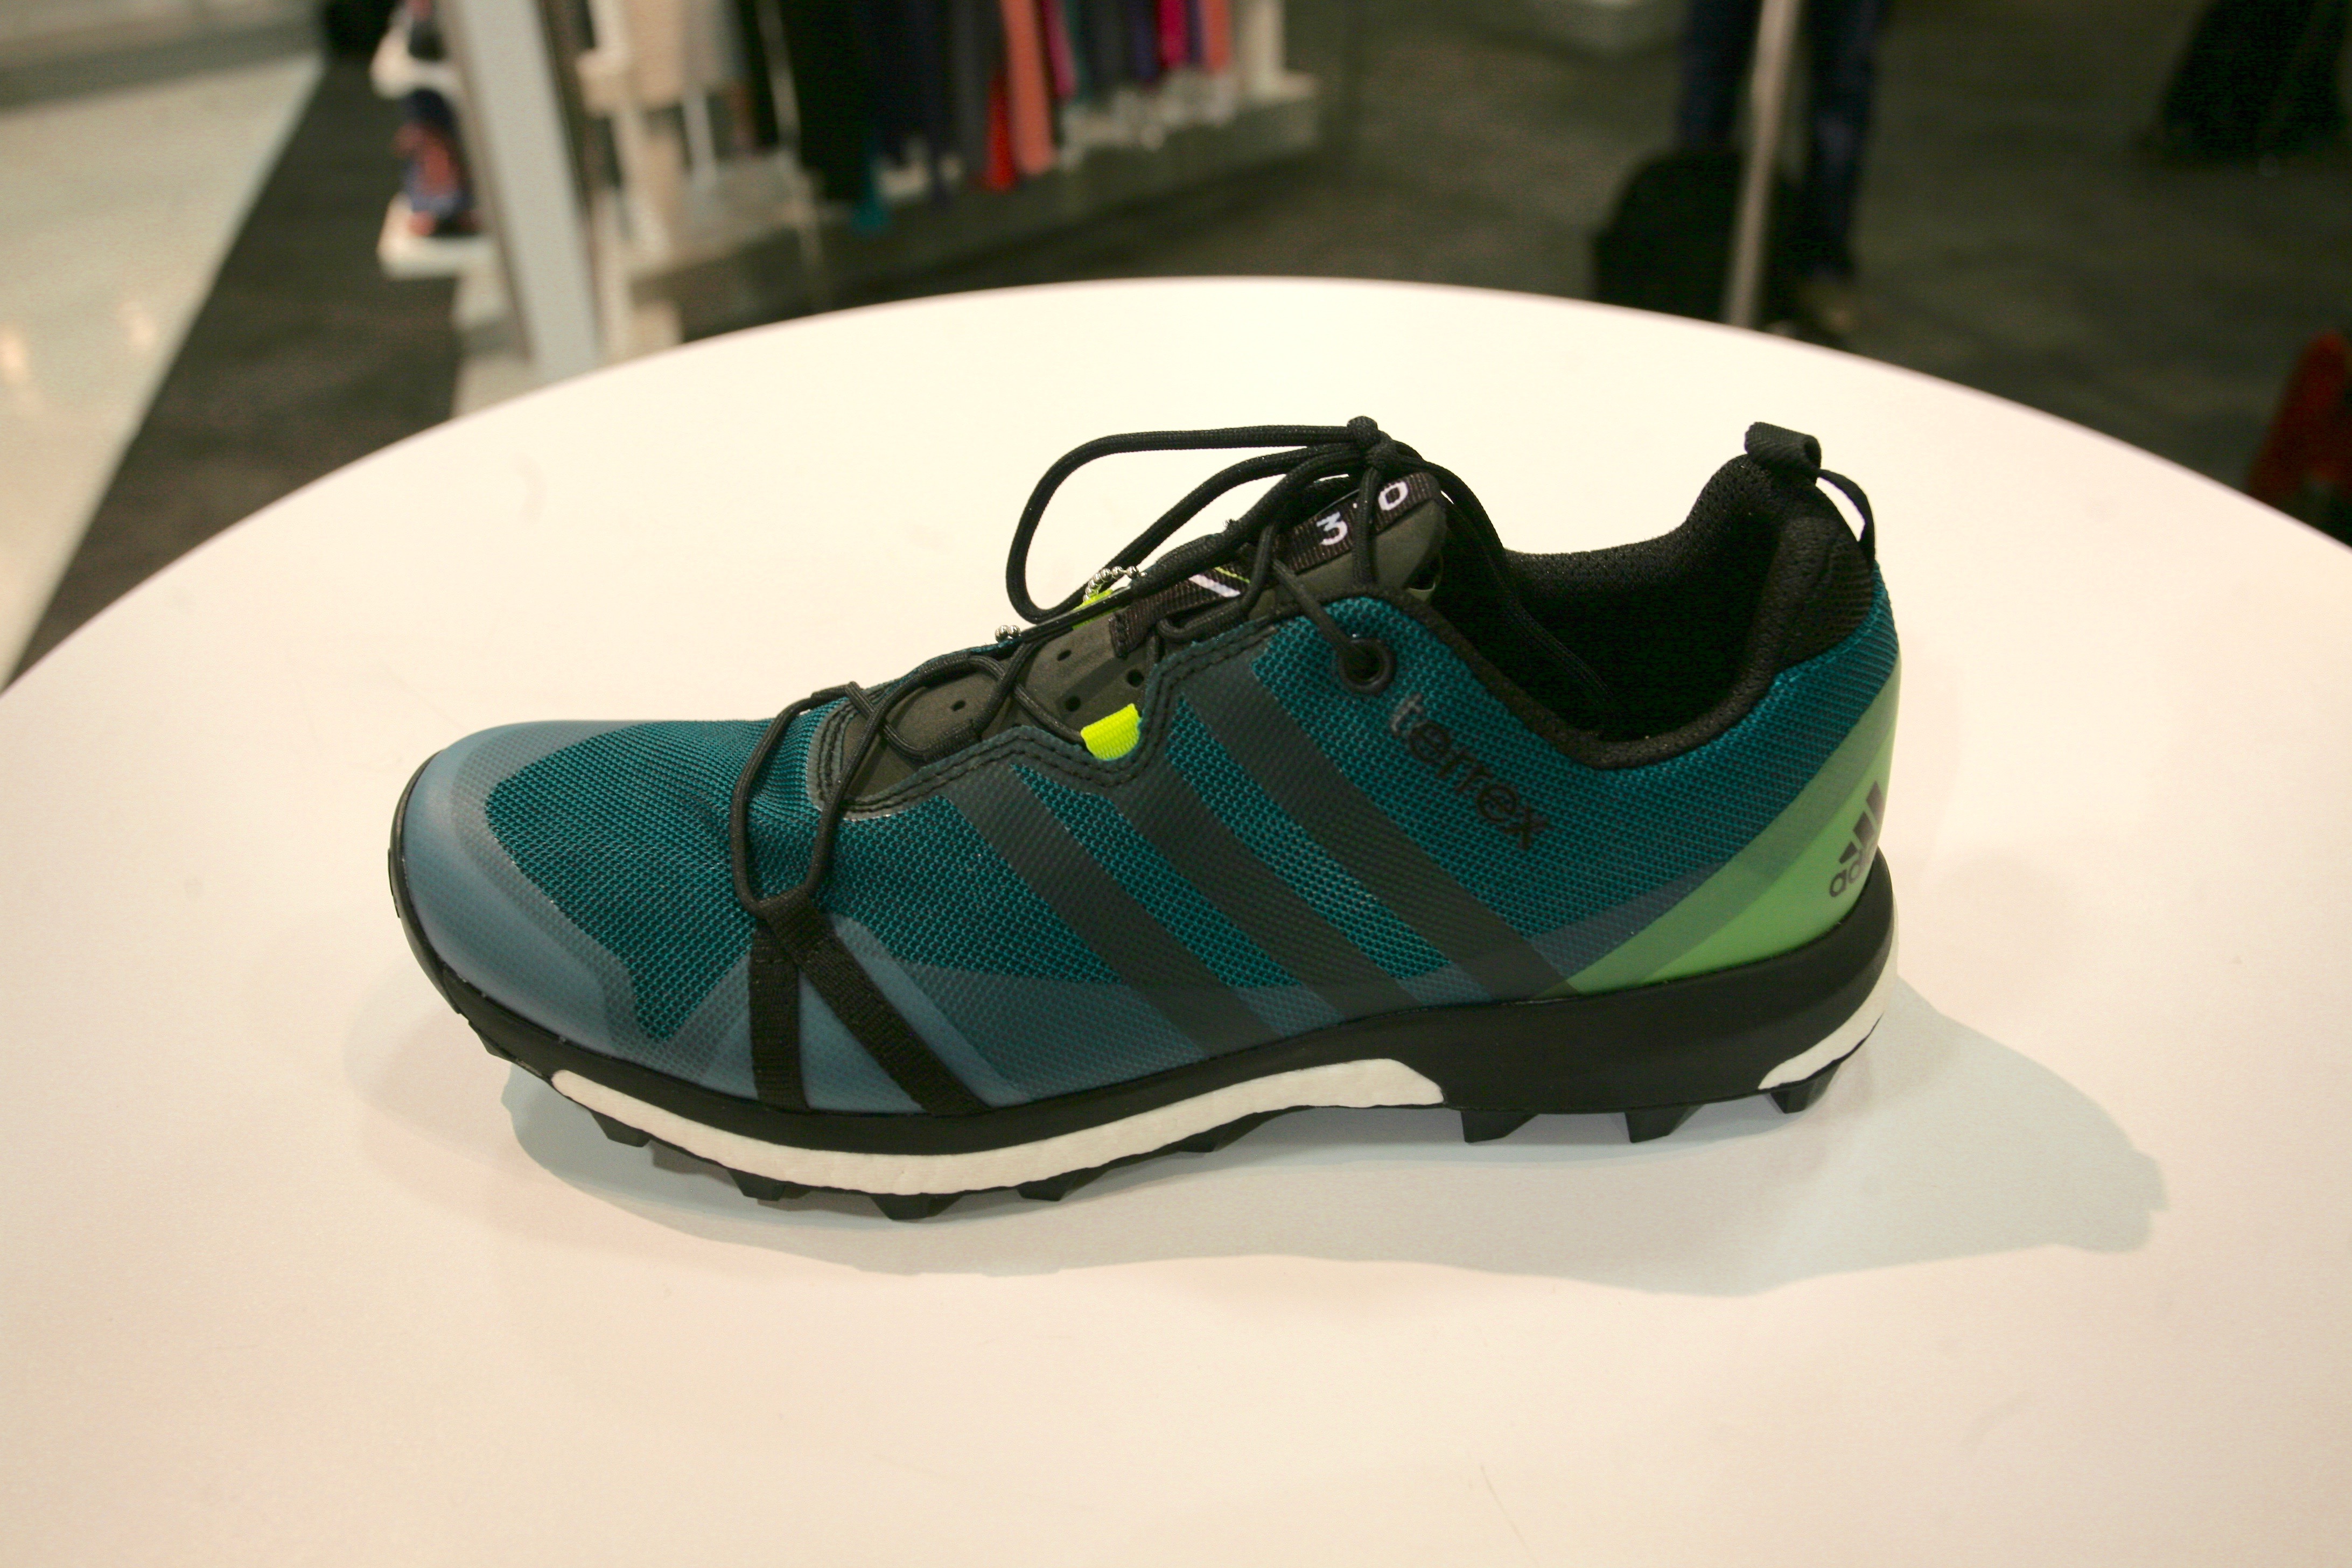 New Shoe Roundup: Mountain Shoes Coming in 2016